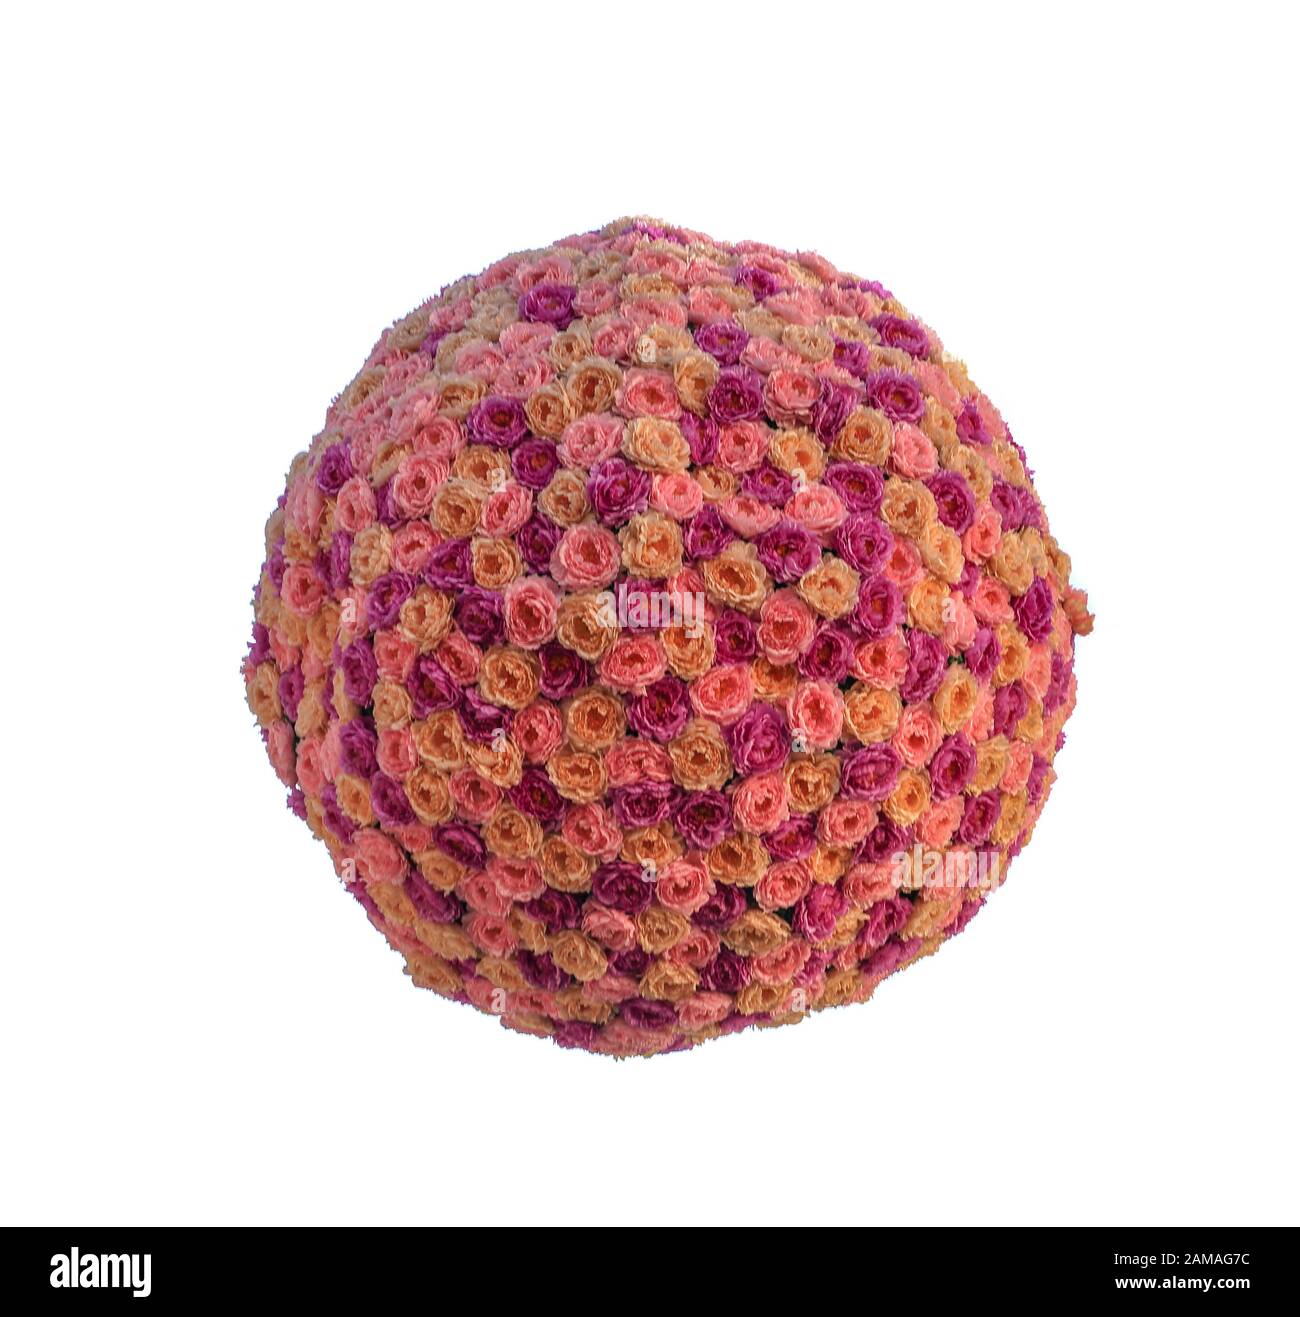 Ball of multi-colored roses on a white background Stock Photo